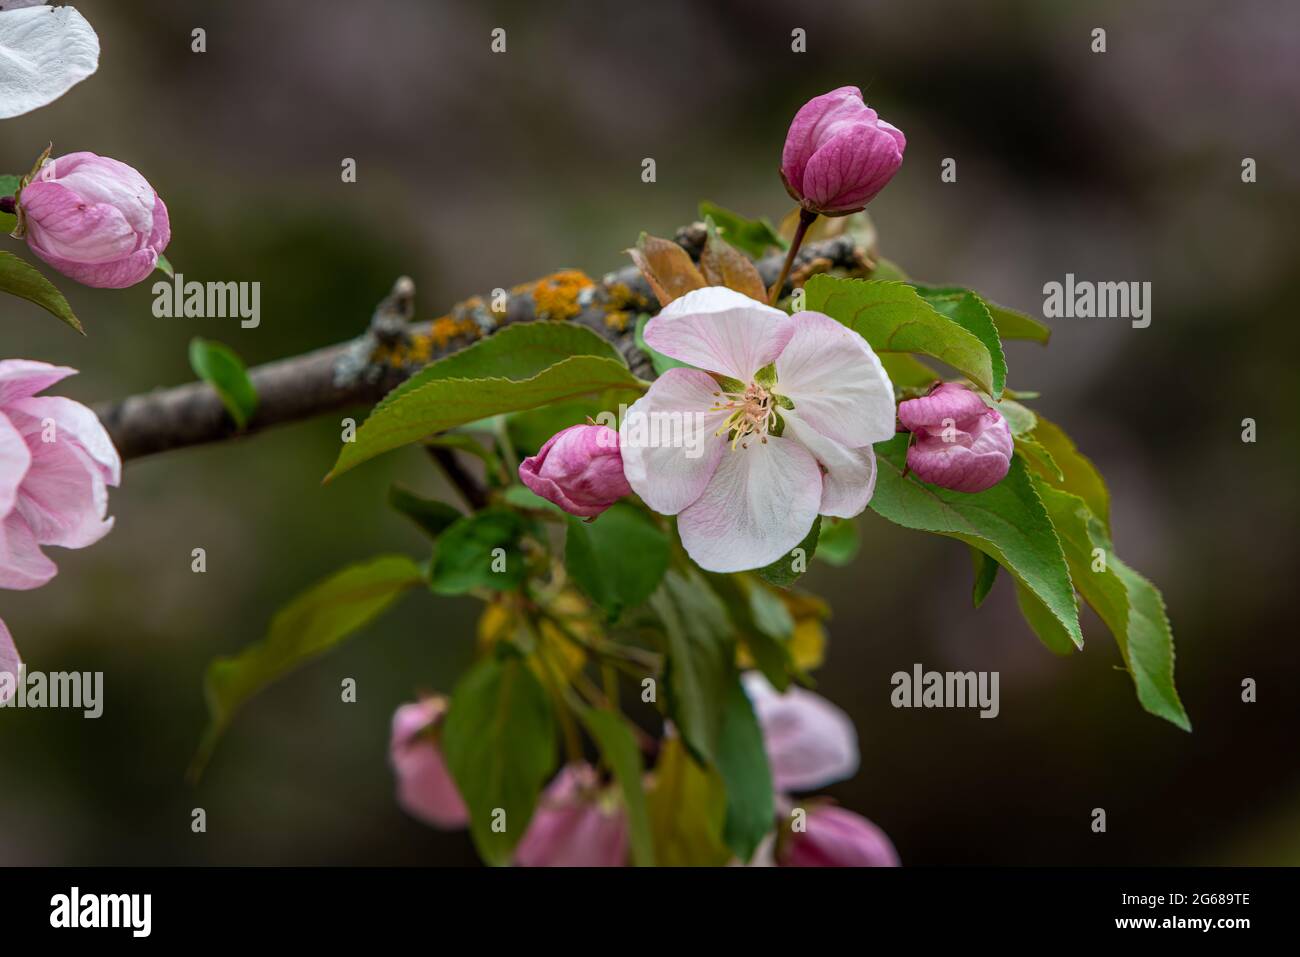 Spring blossoms on an apple tree in the English Gardens, Assiniboine Park, Winnipeg, Manitoba, Canada. Stock Photo